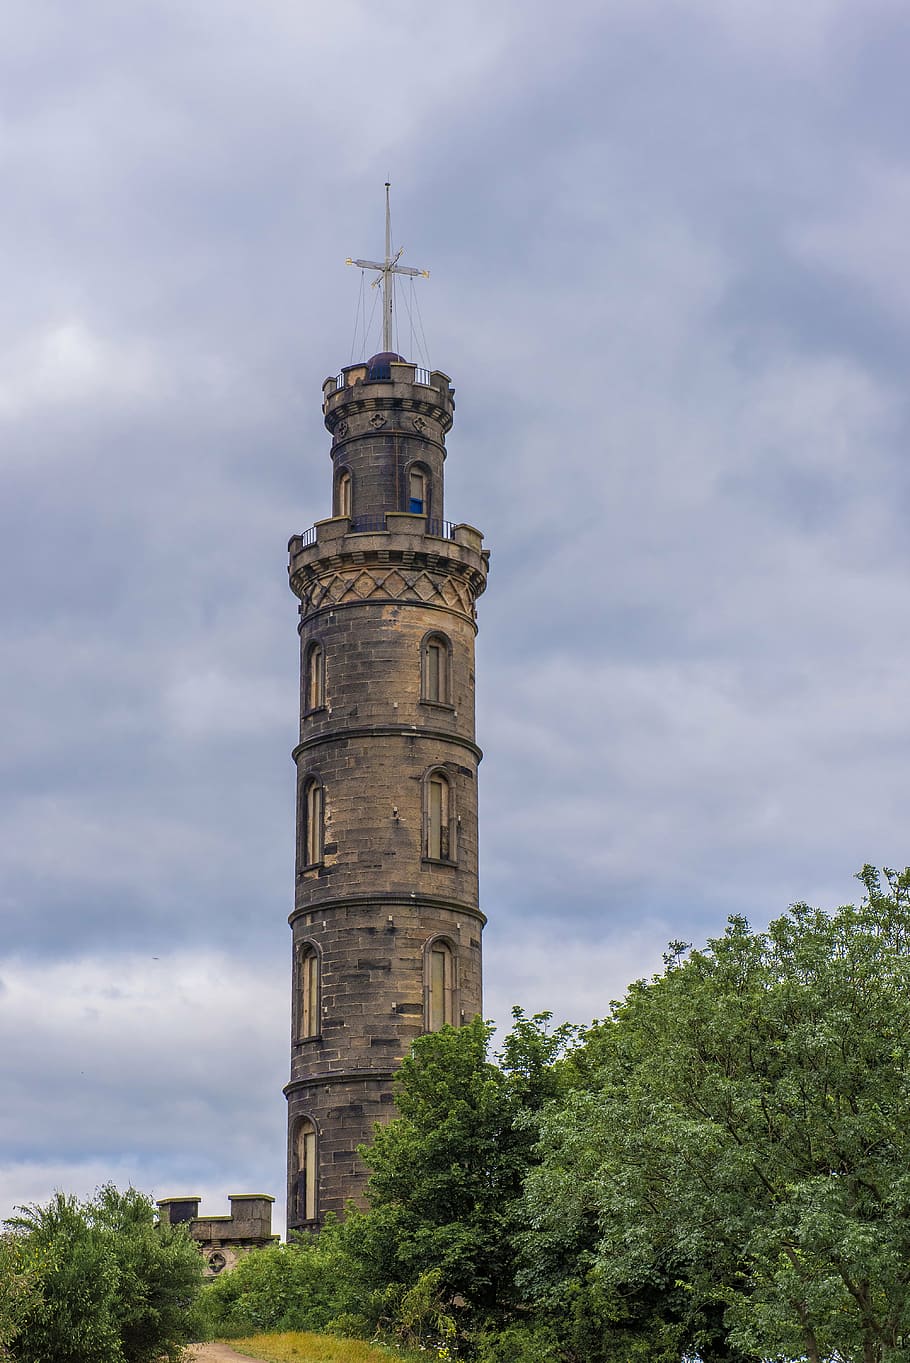 the nelson monument, edinburgh, nelson, scotland, architecture, places of interest, national, travel, building, history